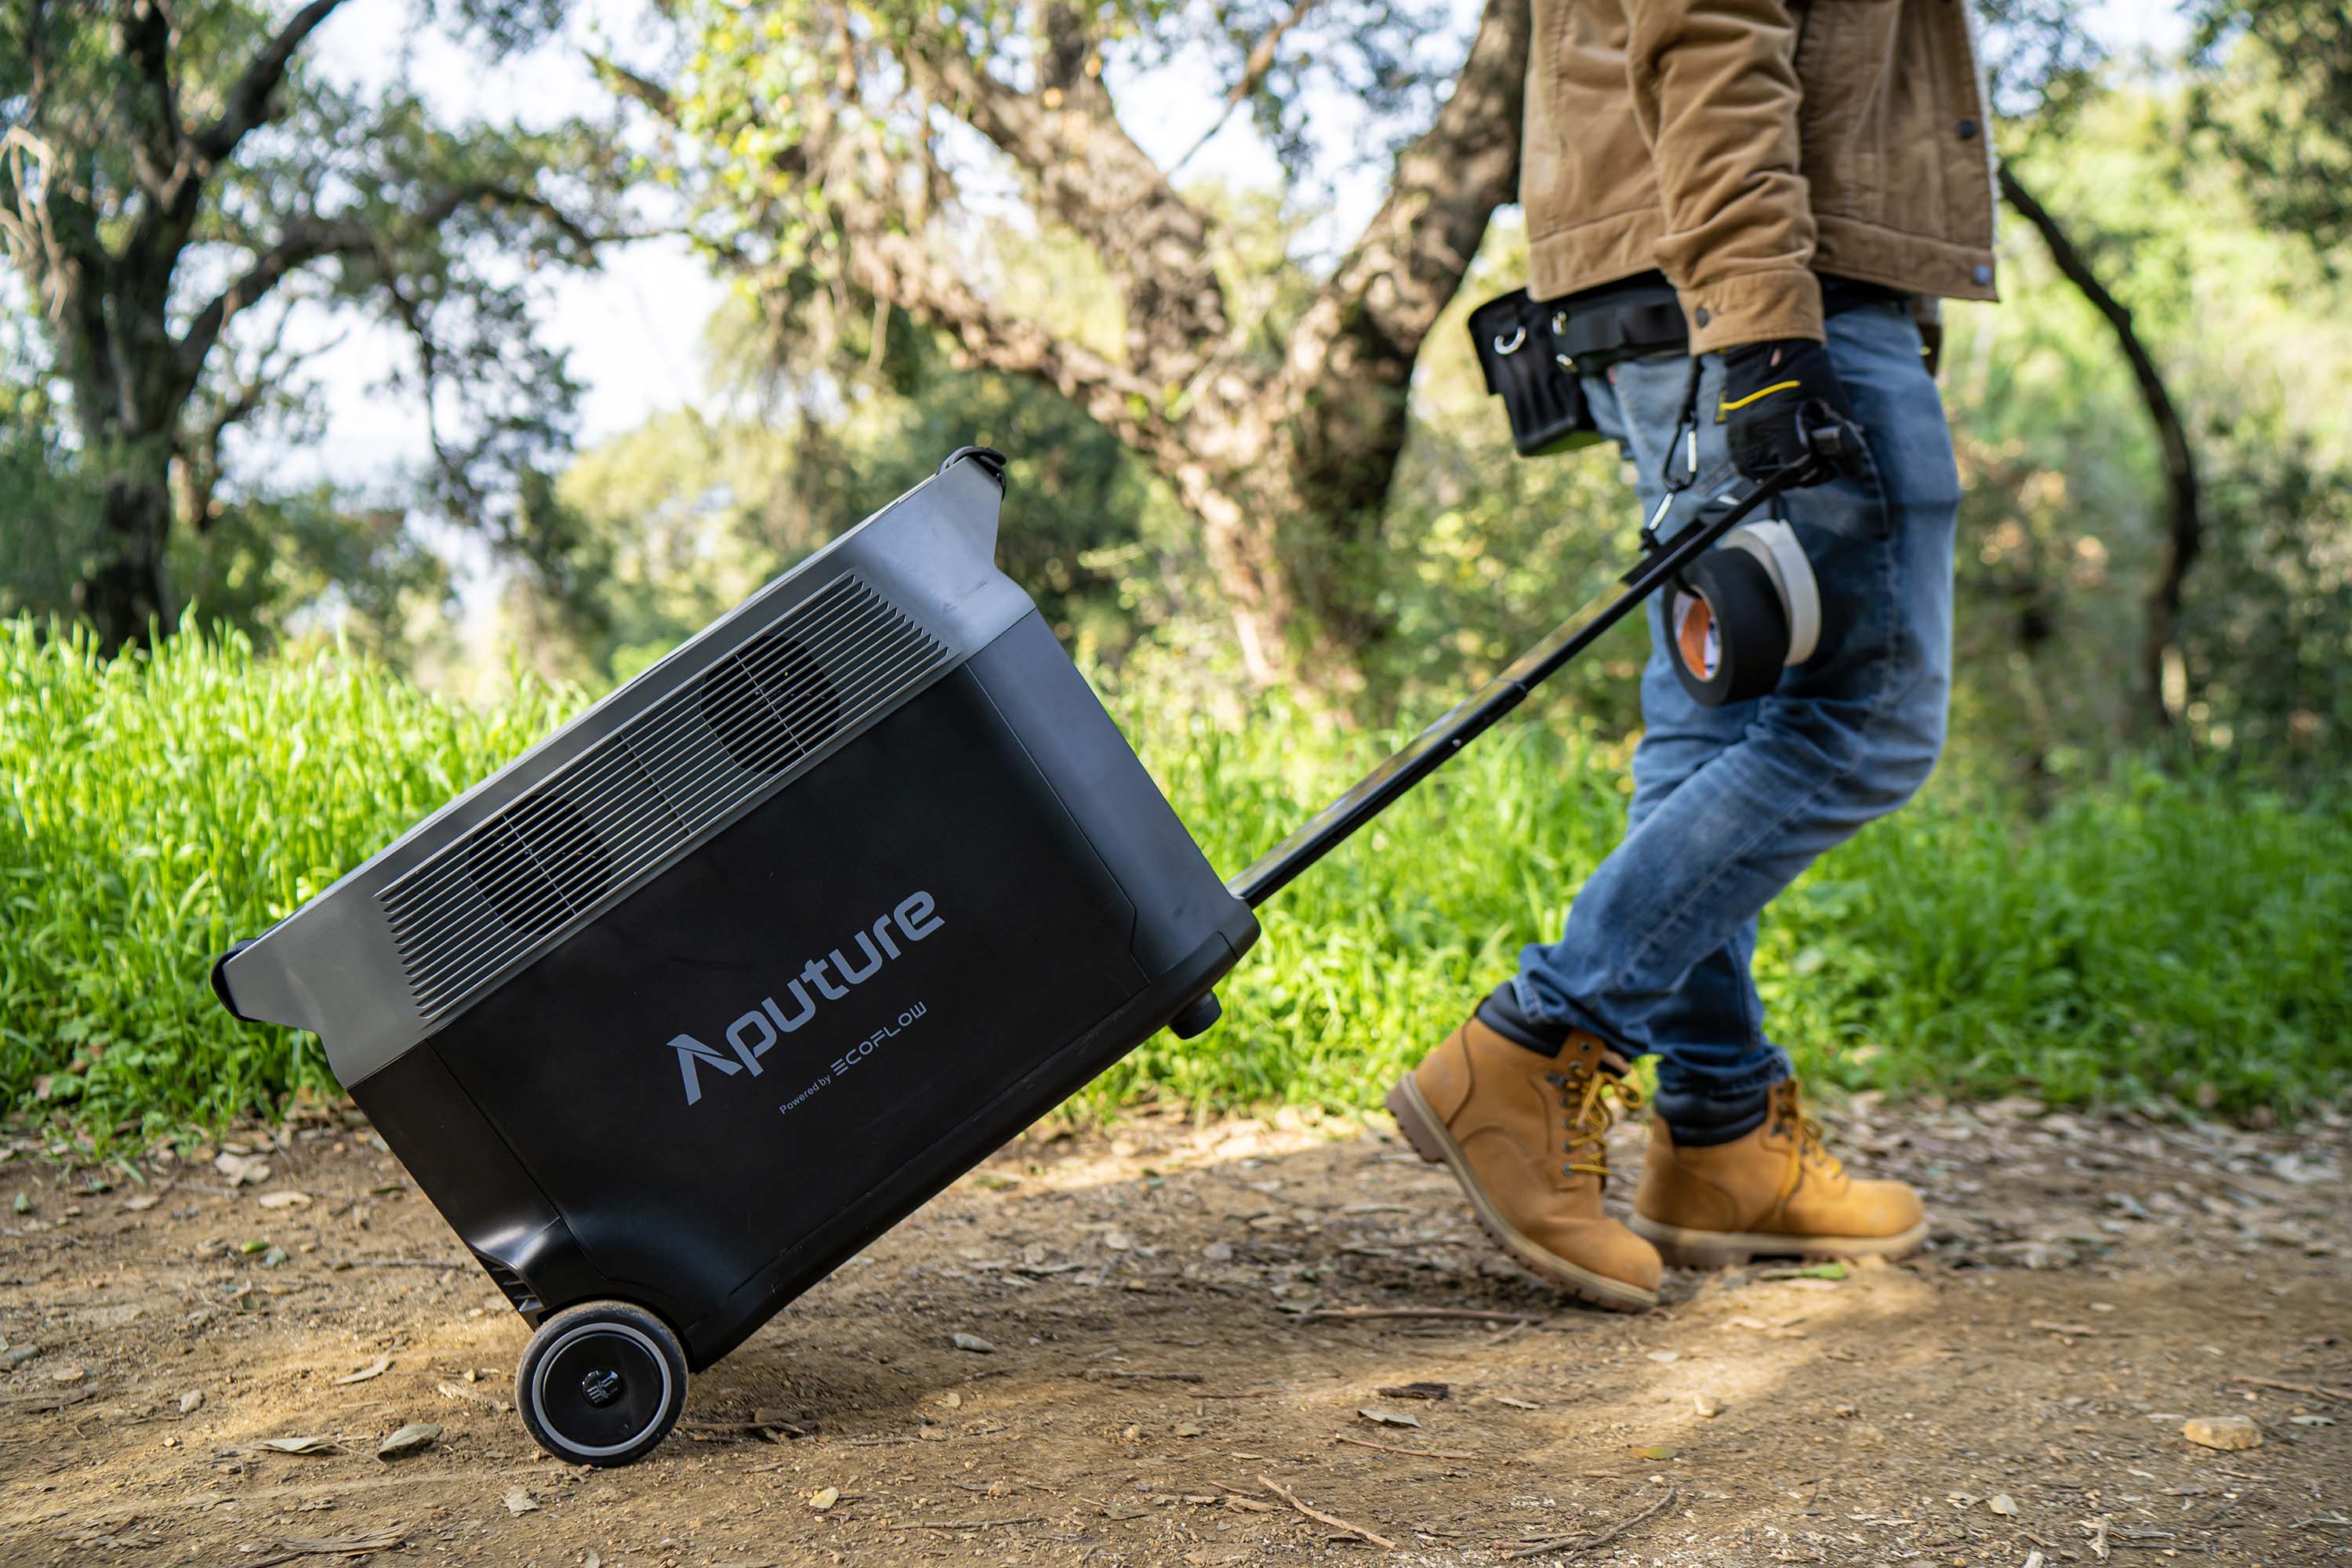 Aputure DELTA Pro (Powered by EcoFlow) Announced - A 3.600Wh Portable  Battery Power Solution